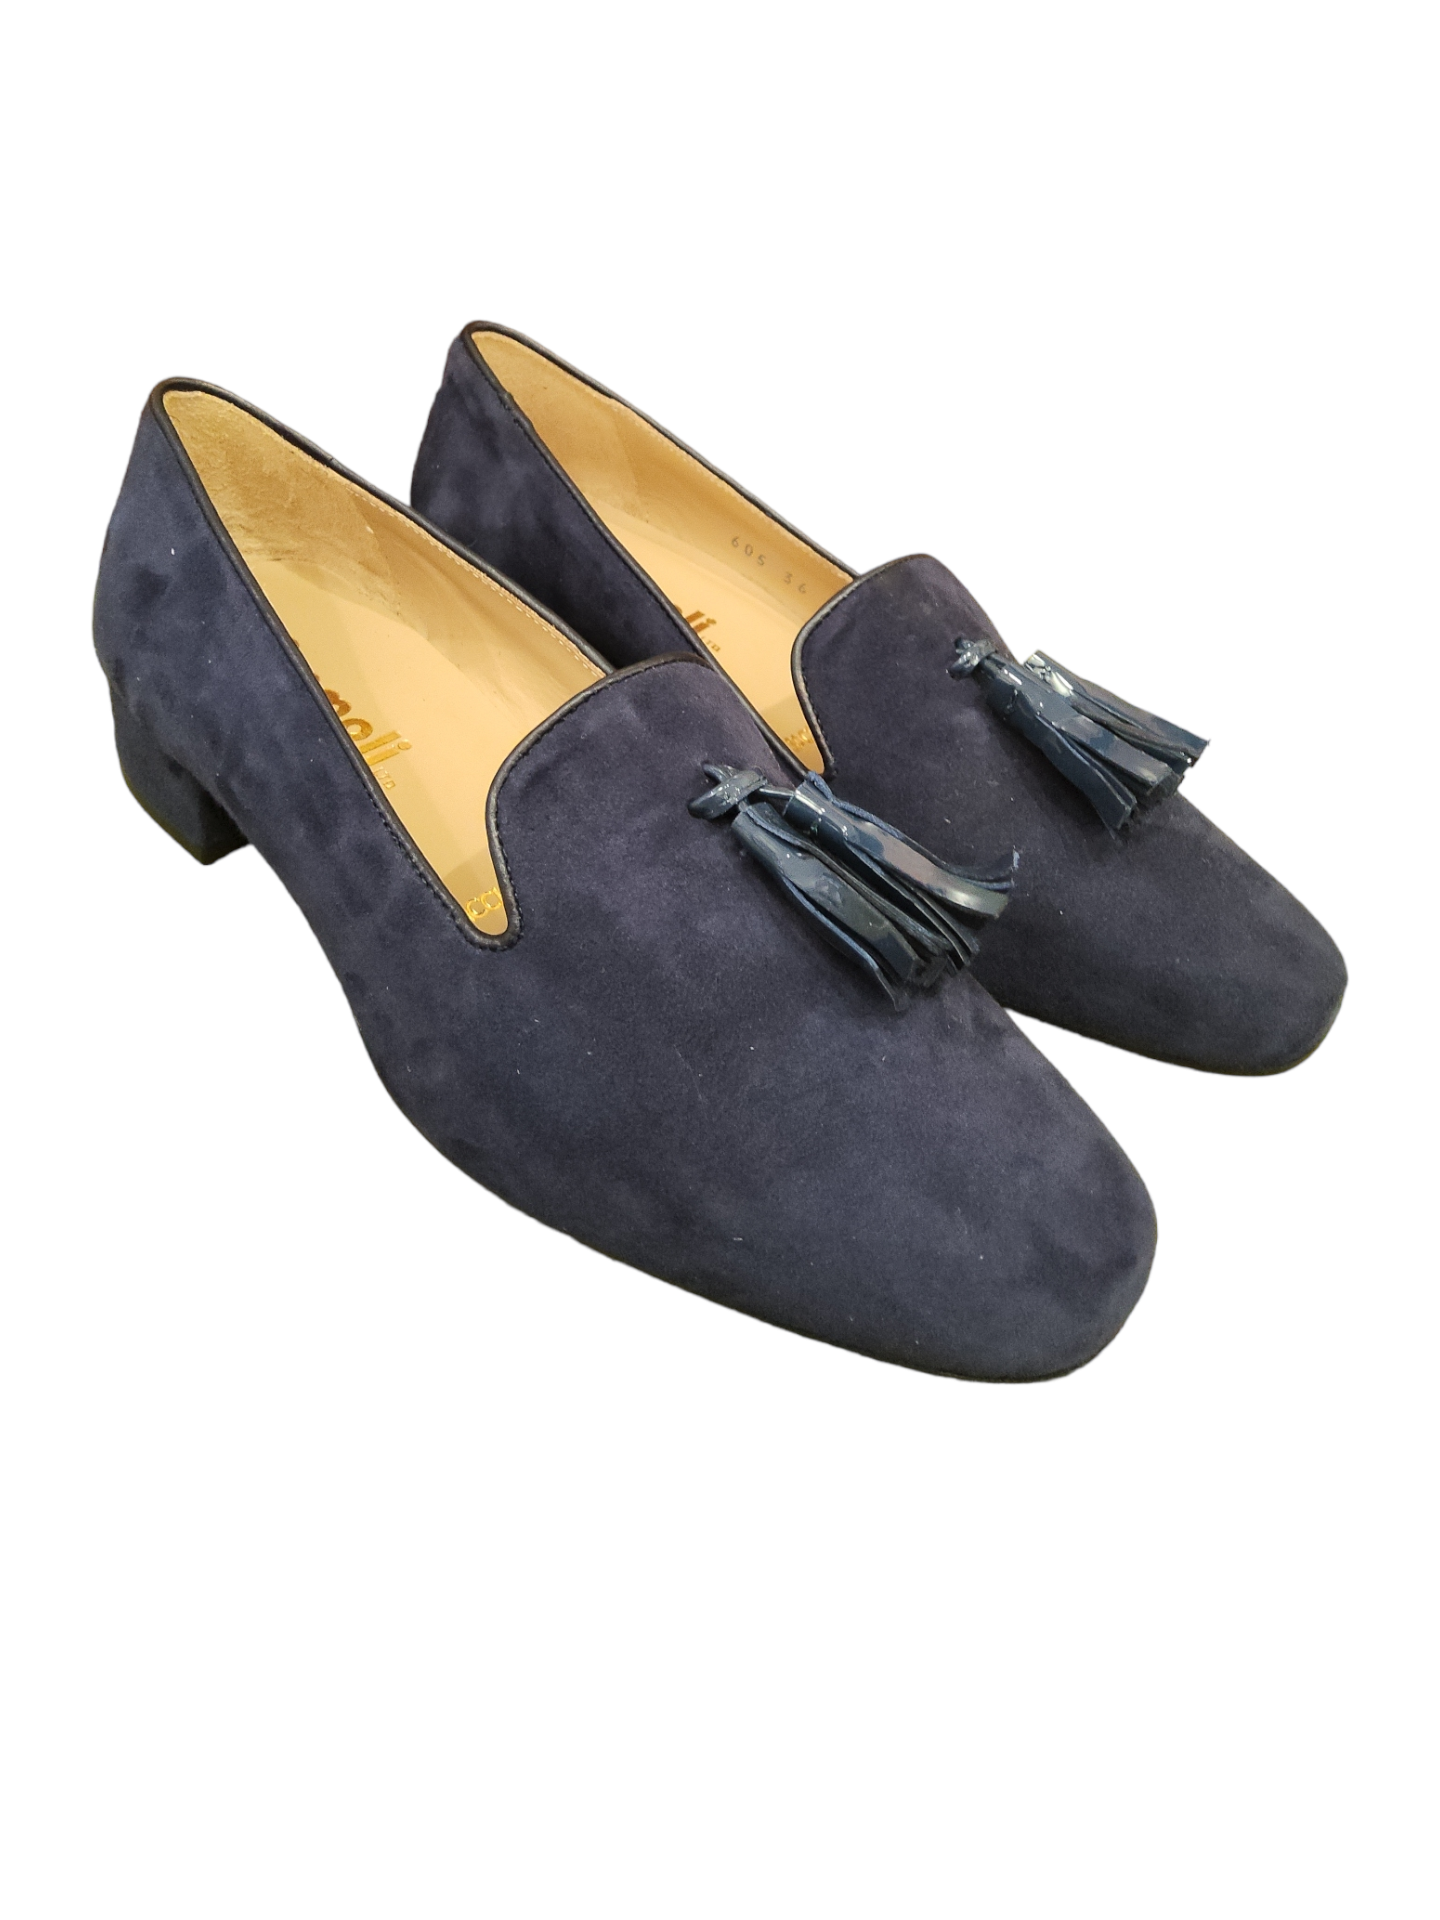 Navy leather loafers